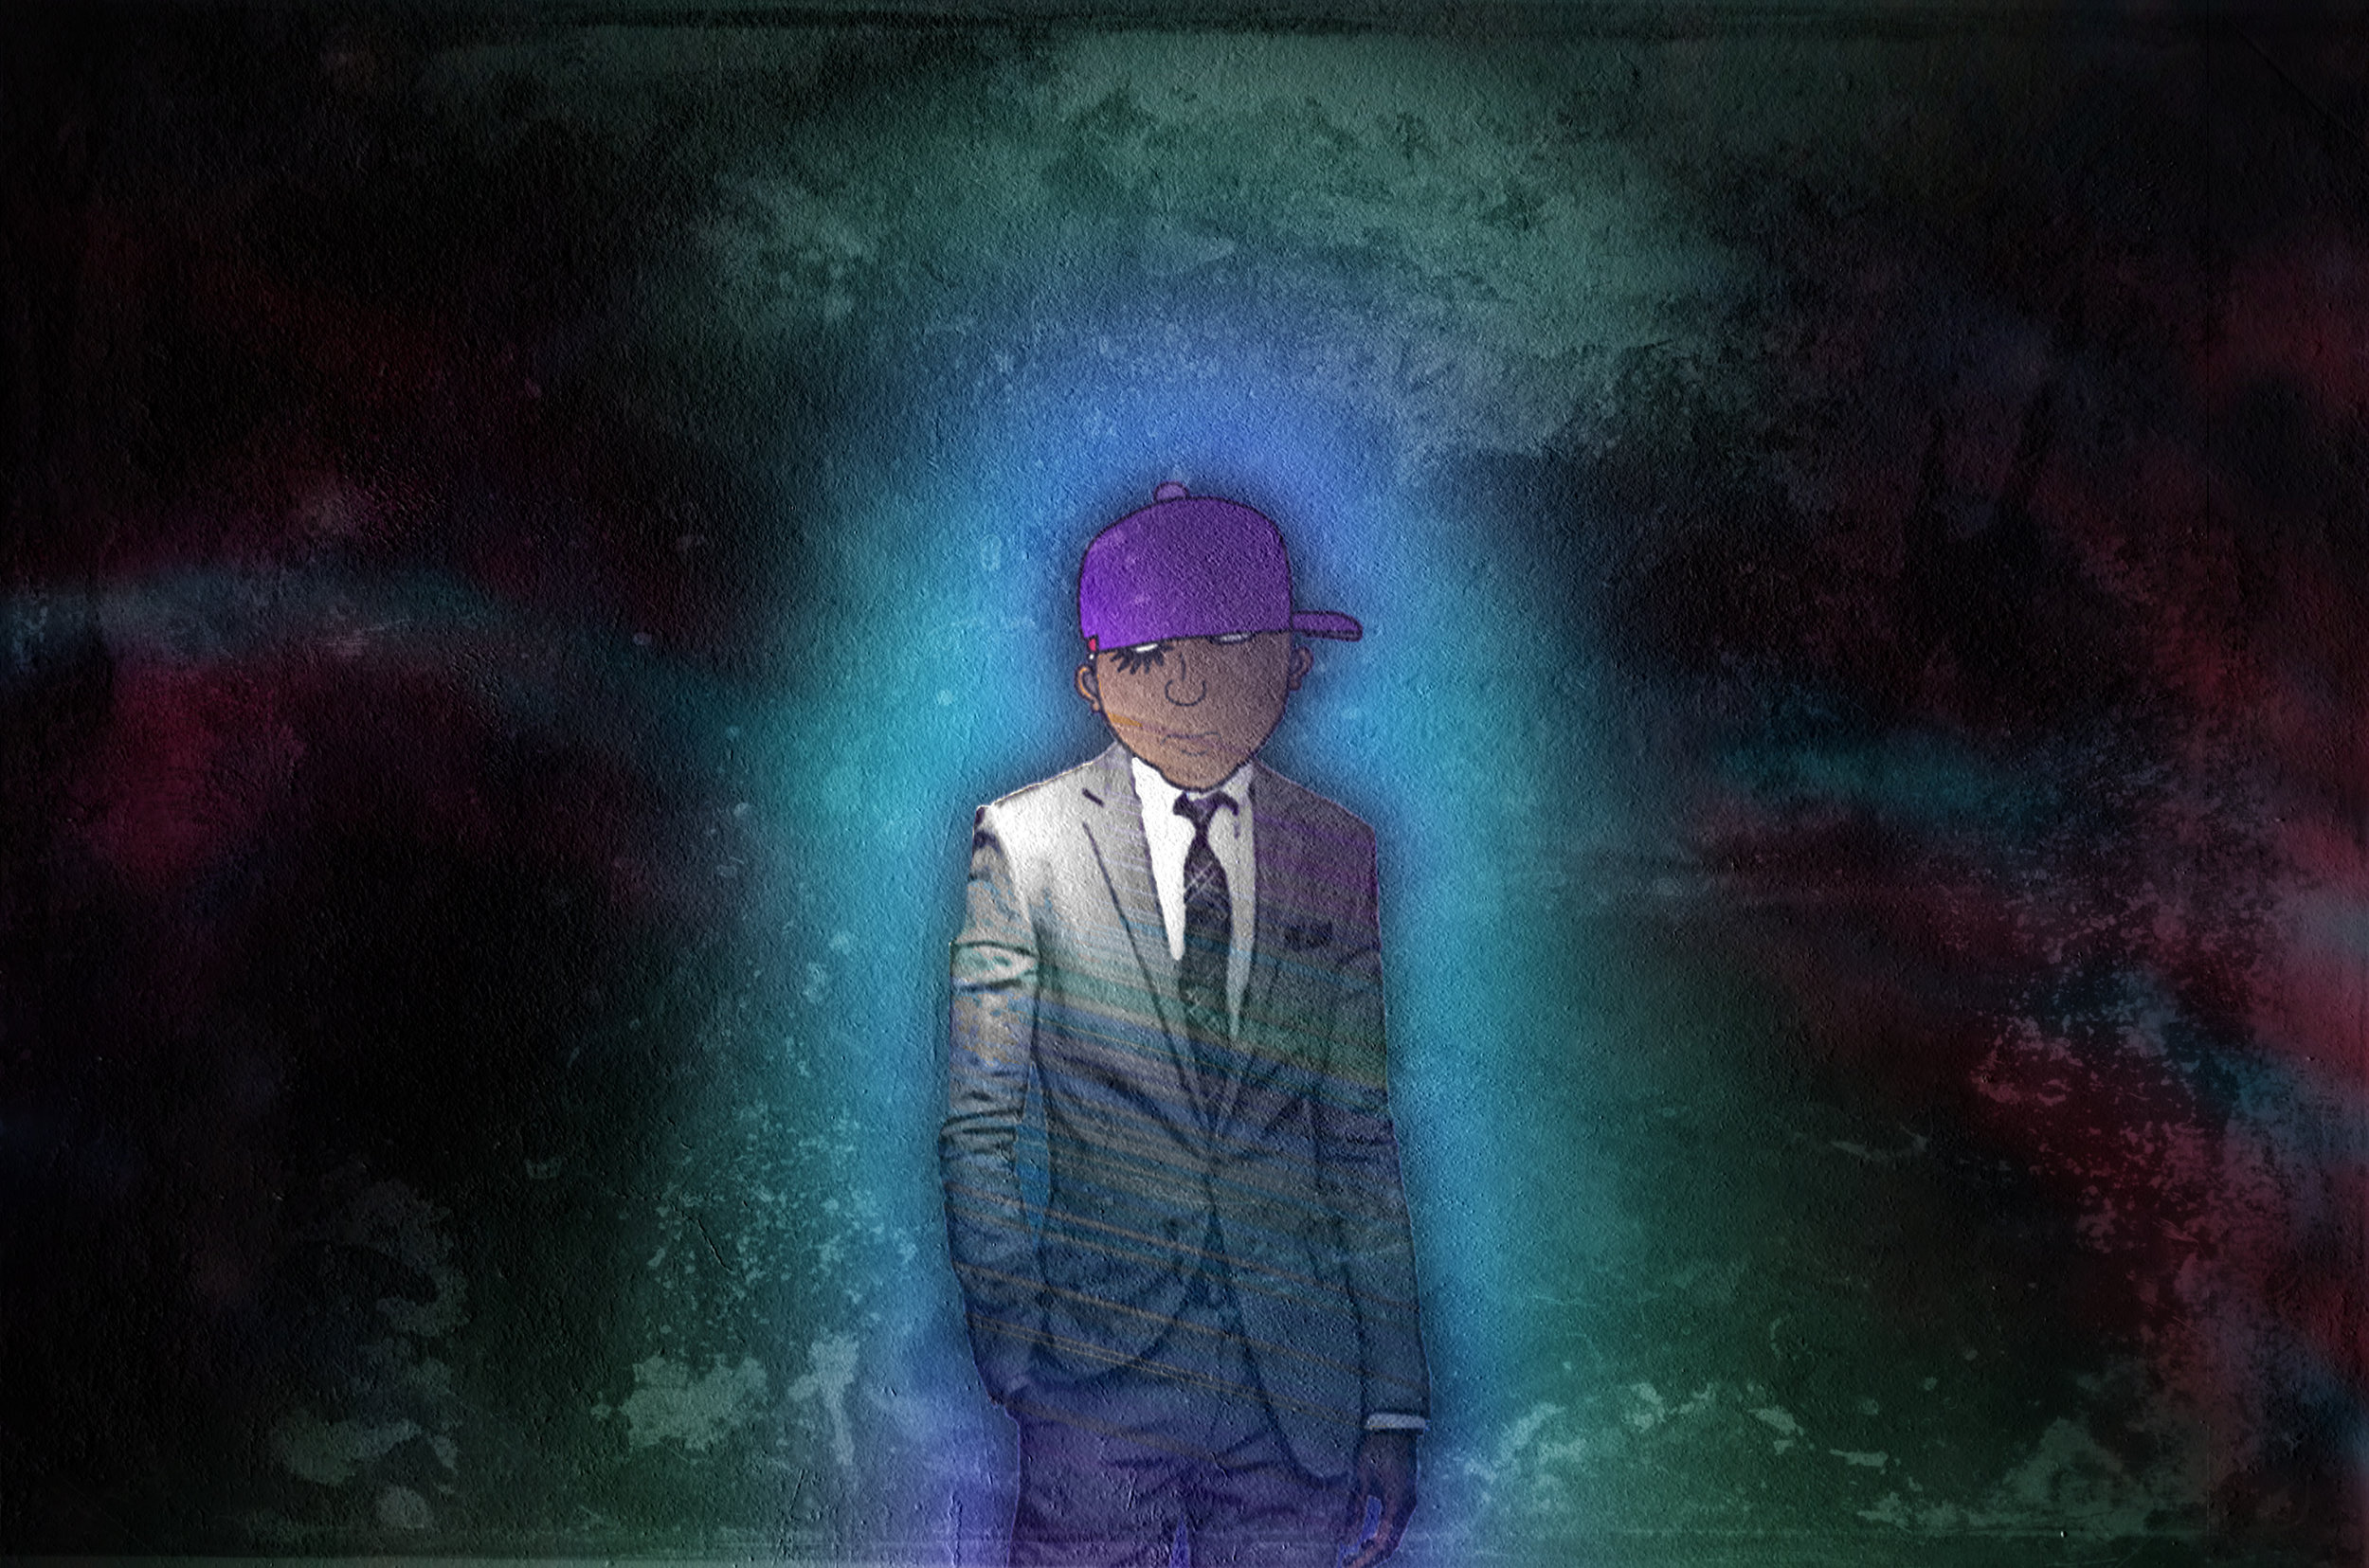 BlackDroog-Grey Suit Abstract.jpg